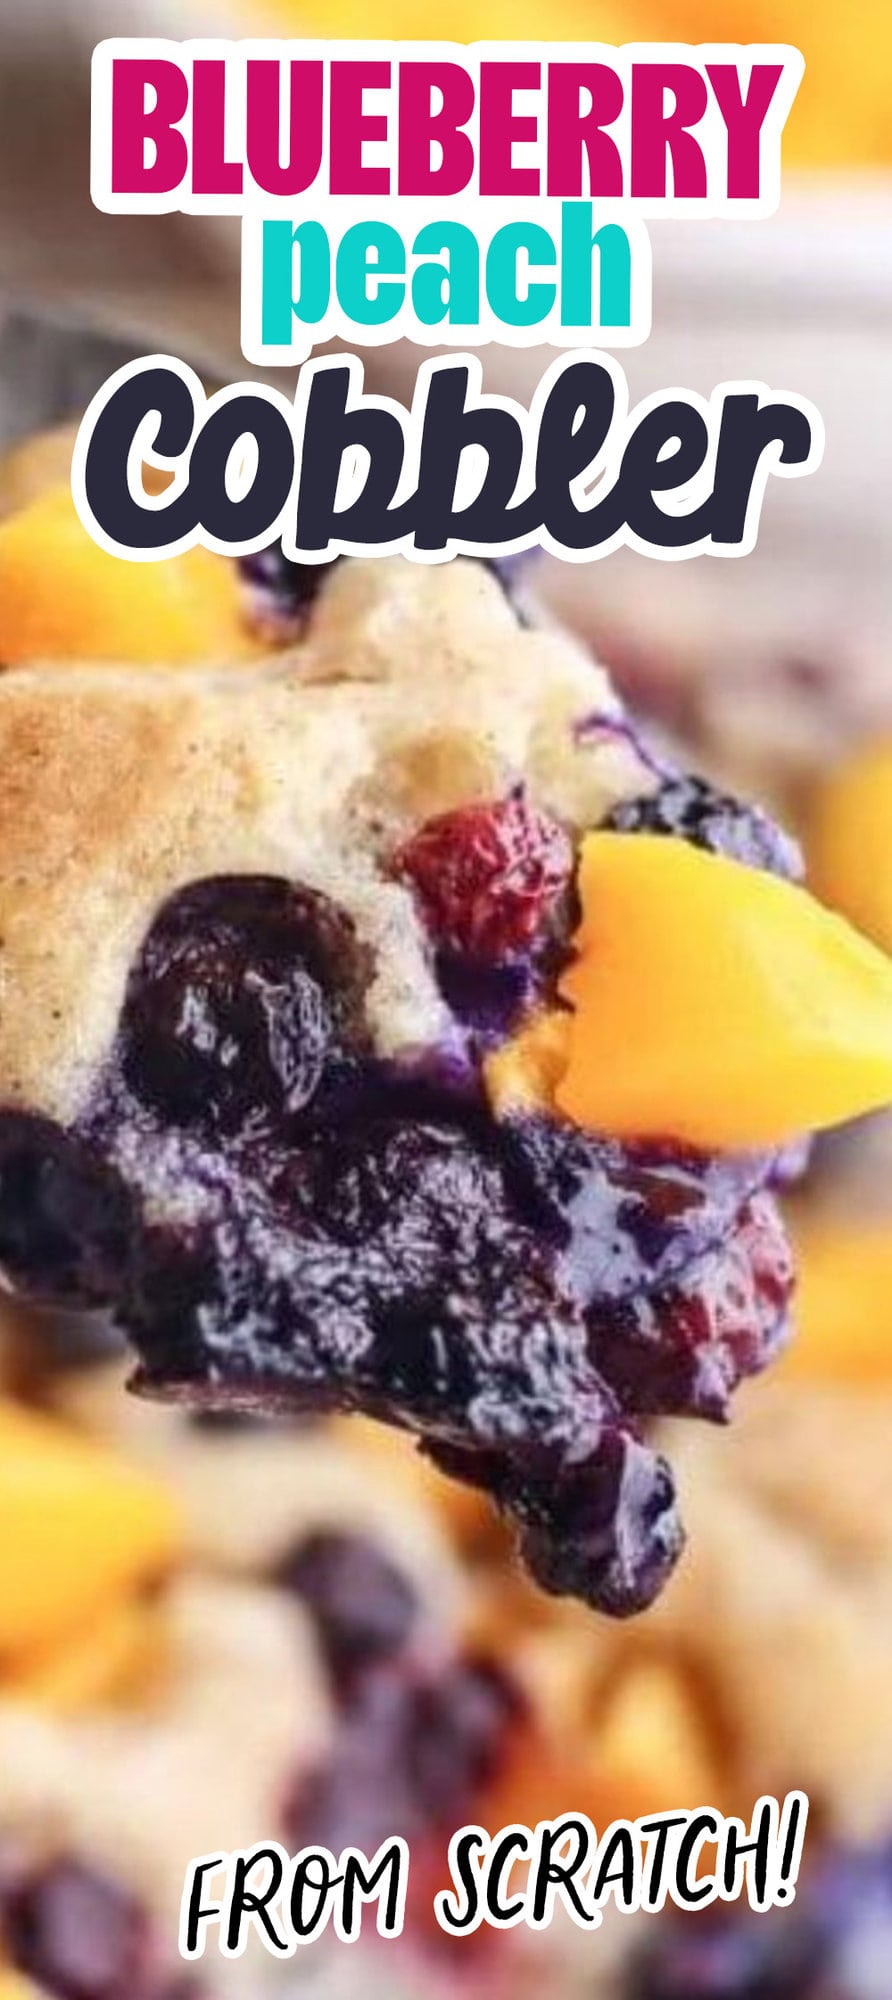 blueberry peach baked cobbler with baked topping on it on a fork